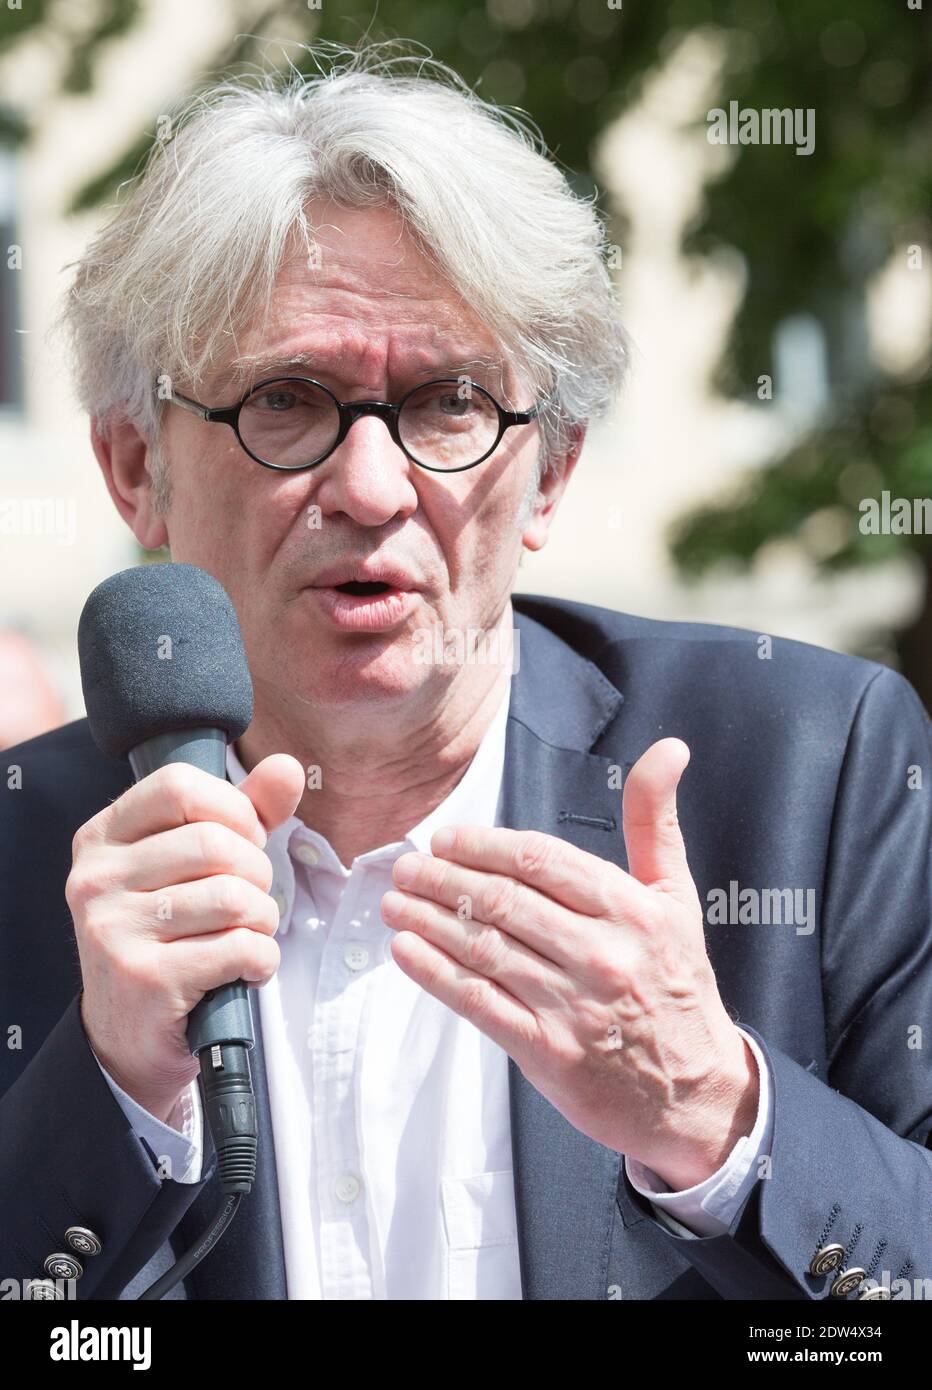 Jean-Claude Mailly, general secretary of the FO union (Force Ouvriere -  Workers' Force) speaks to journalists as part of the FO May Day Rally in  Lyon, central-eastern France on May 1, 2014.